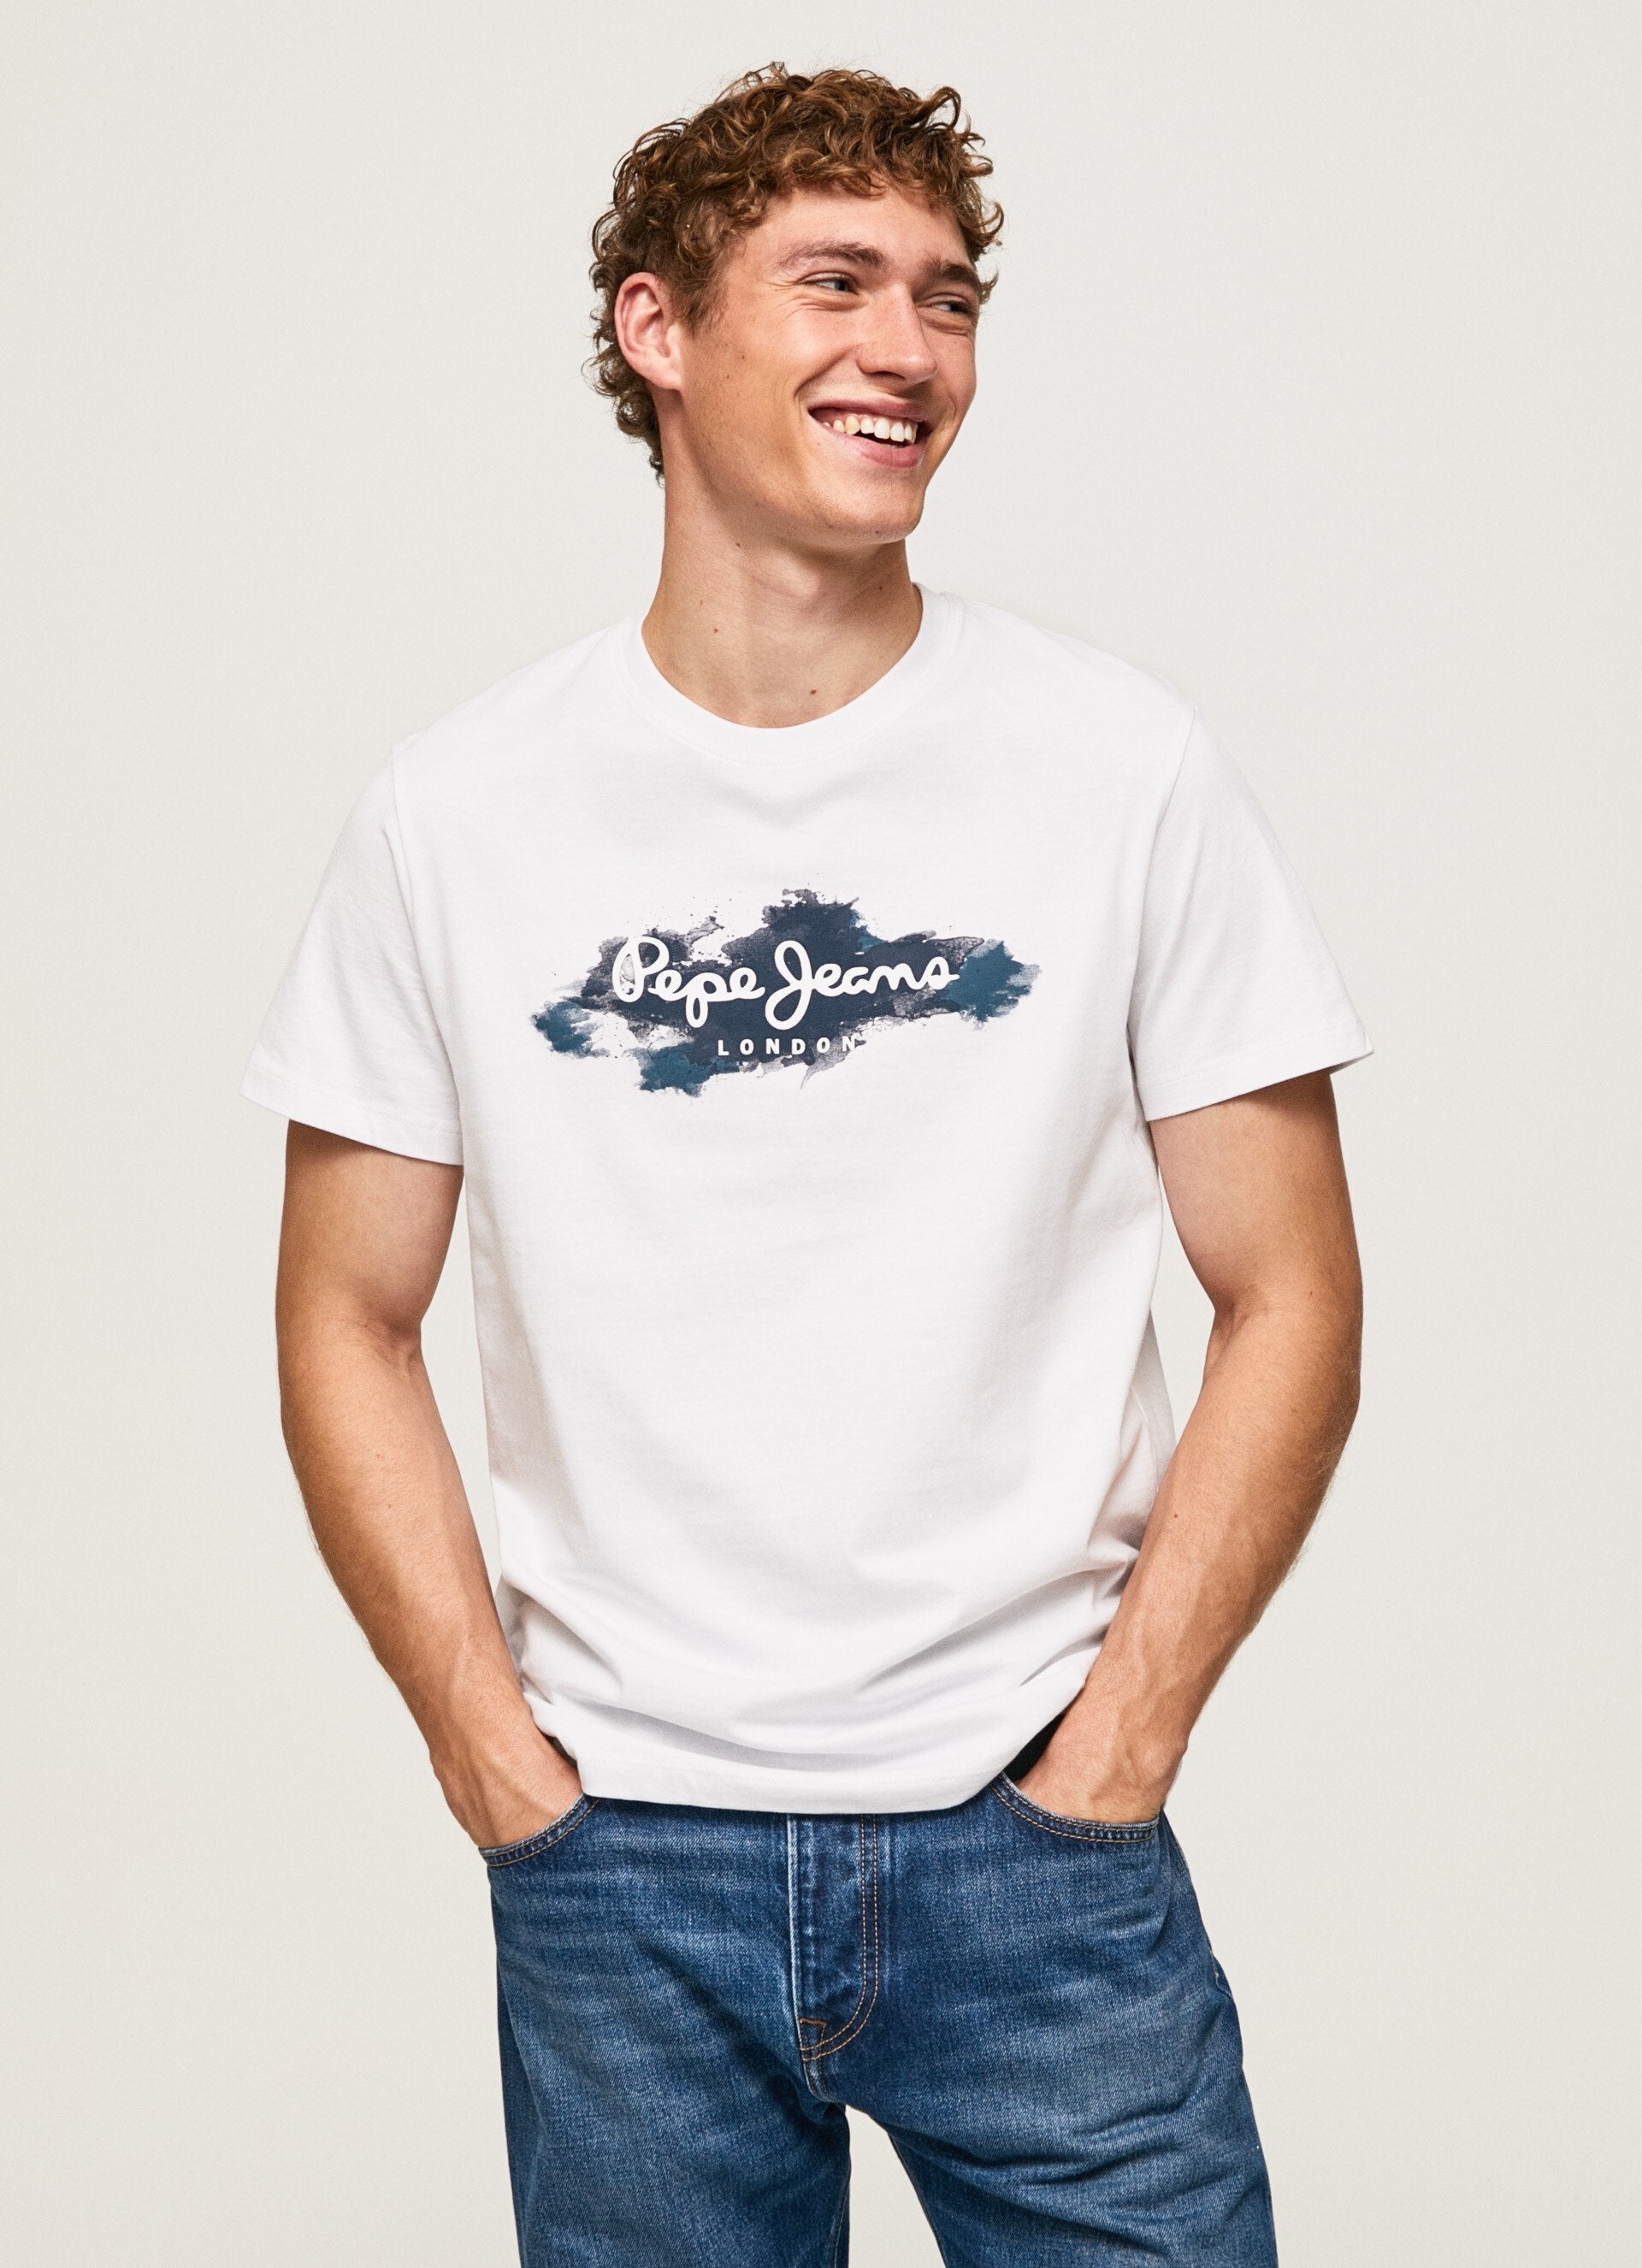 PEPE JEANS LONDON OLDWIVE T-SHIRT | WHITE REGULAR FIT